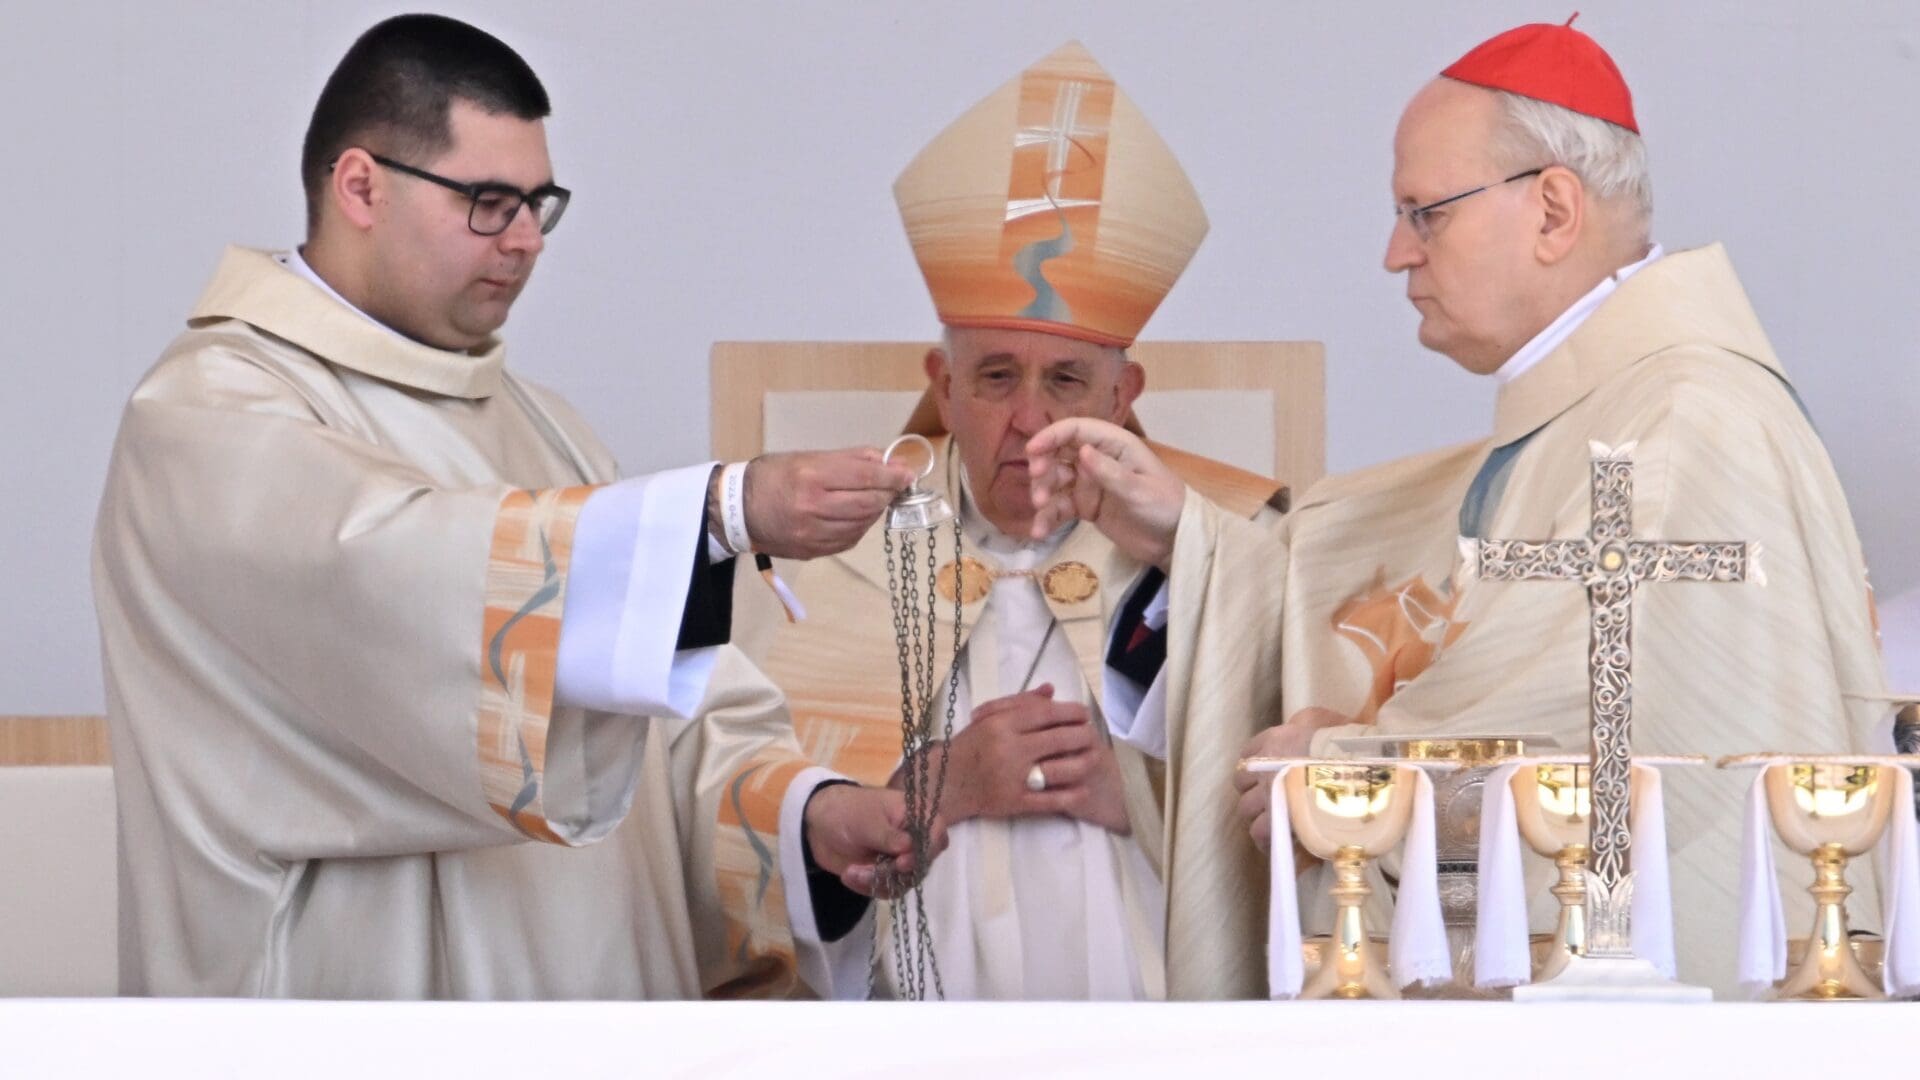 Pope Francis (C) and Cardinal Peter Erdo (R), Archbishop of Esztergom-Budapest and Primate of Hungary, celebrate a holy mass at Kossuth Lajos' Square during the Pope's visit in Budapest on April 30, 2023, the last day of his tree-day trip to Hungary.